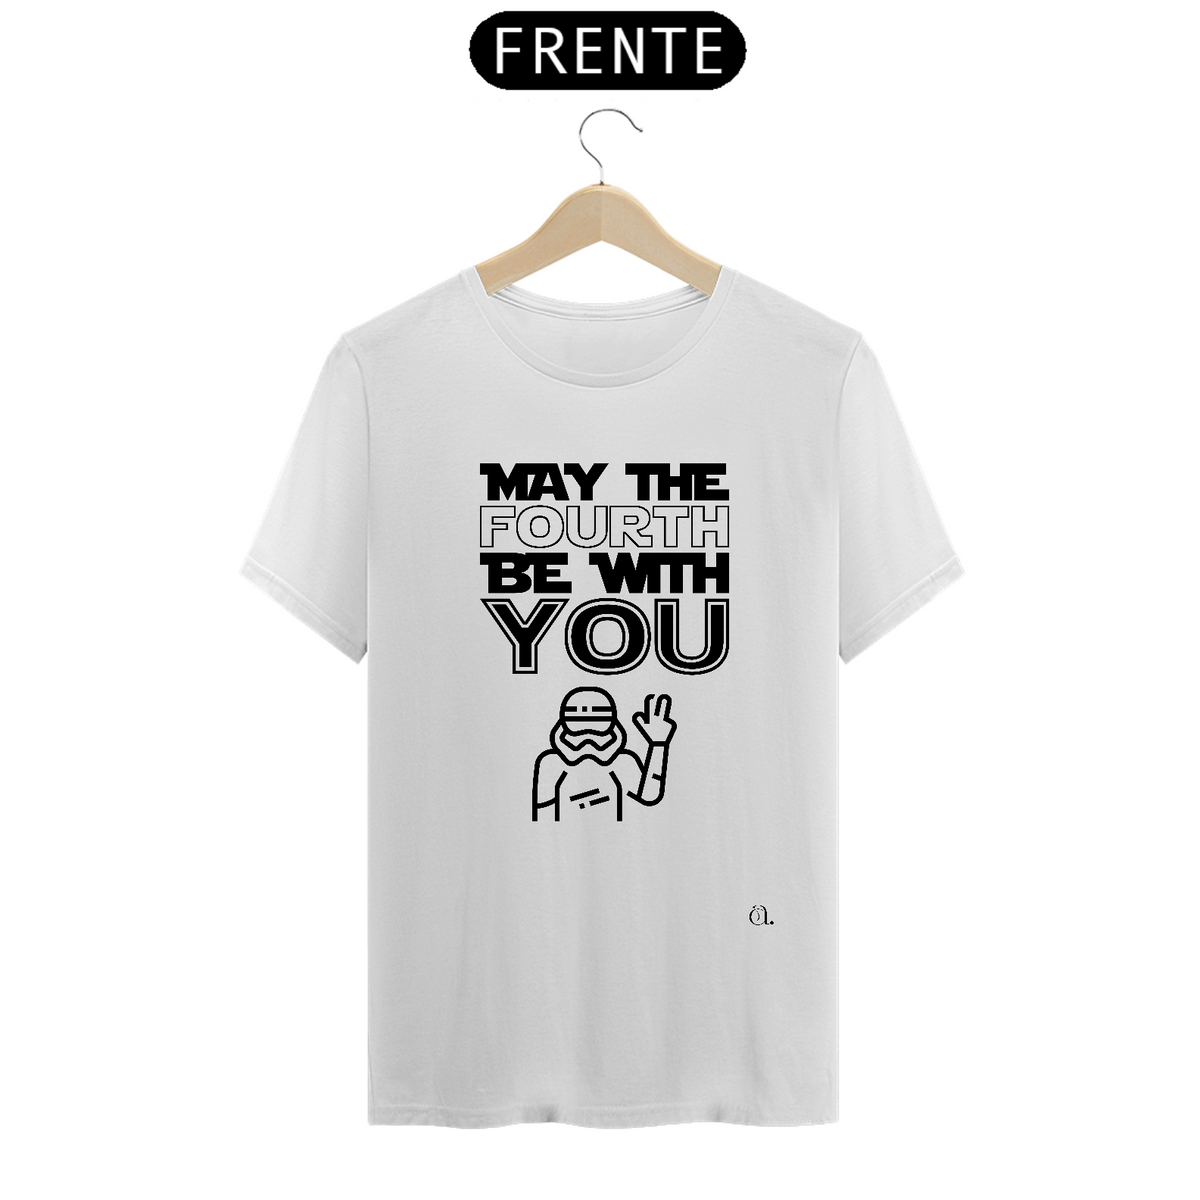 Nome do produto: Camiseta May The Fourth Be With You